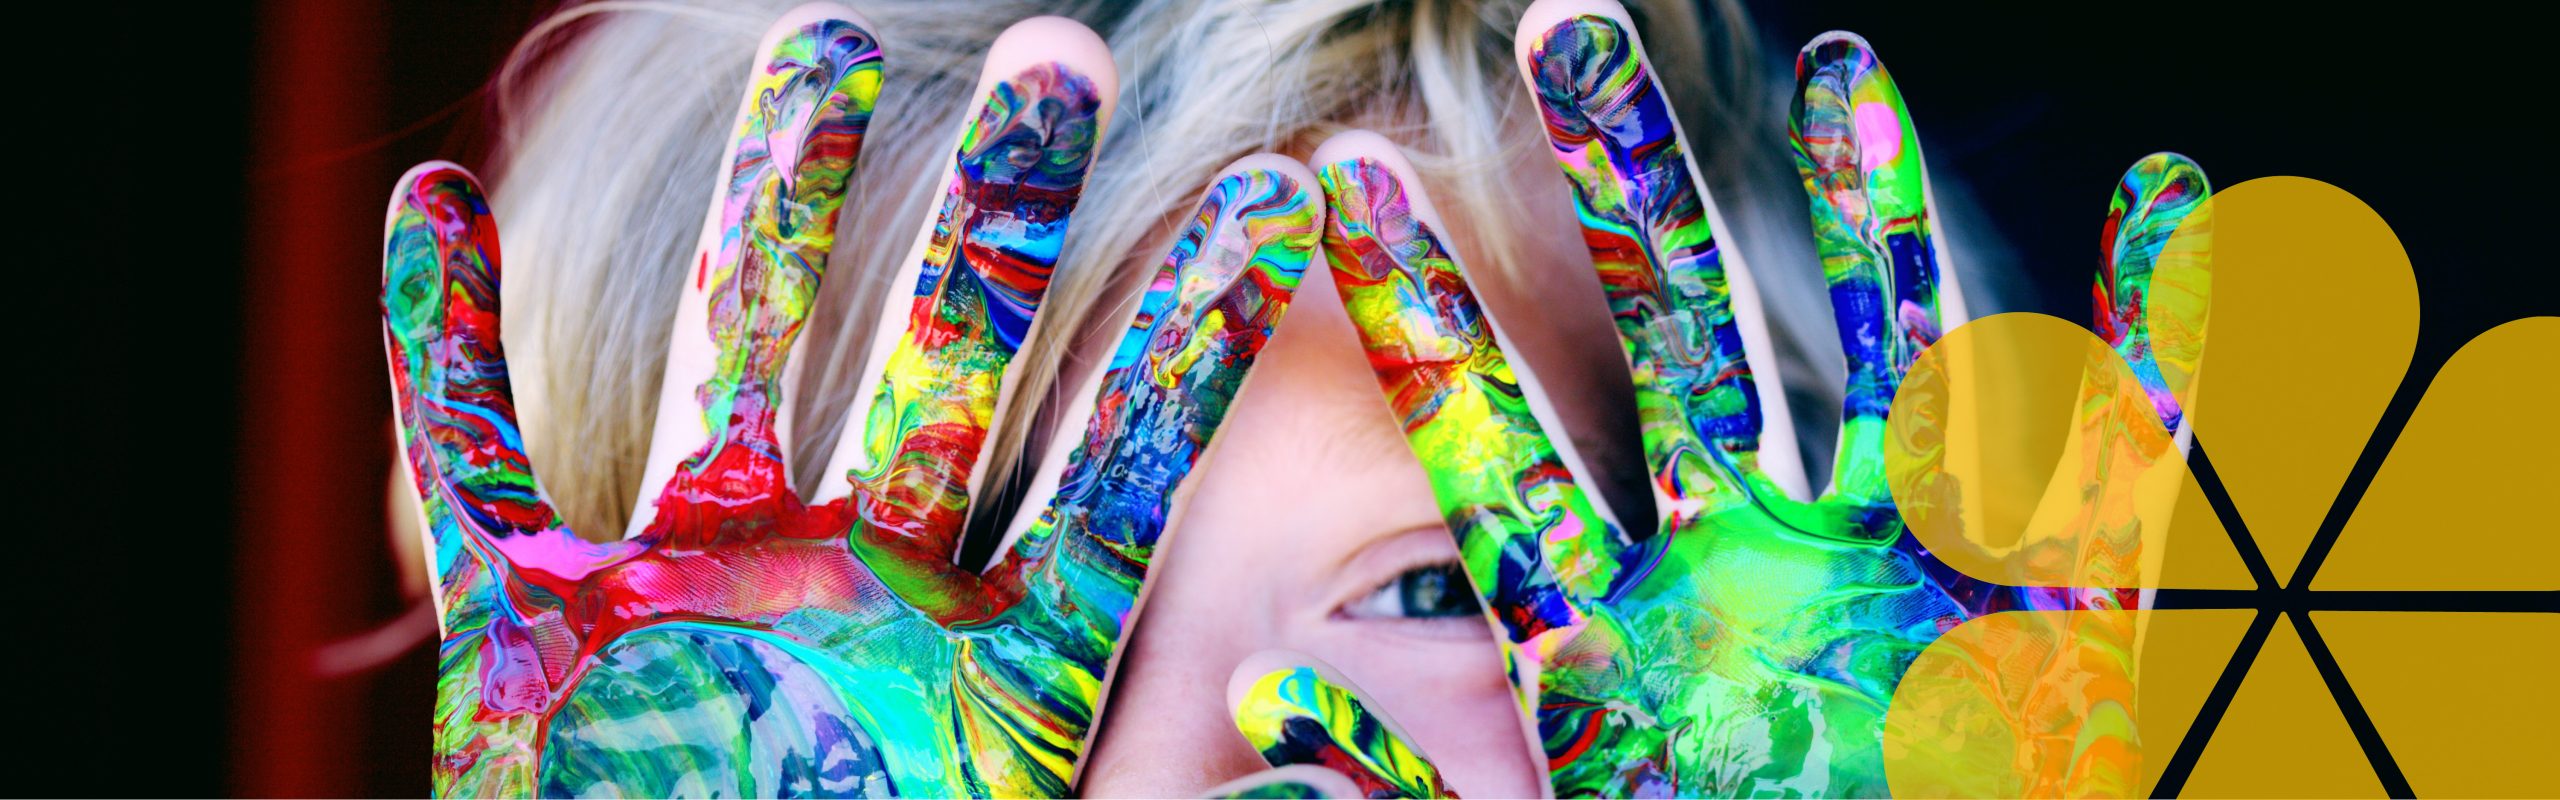 A image of a childs hands with paint all over them like they have been hand painting